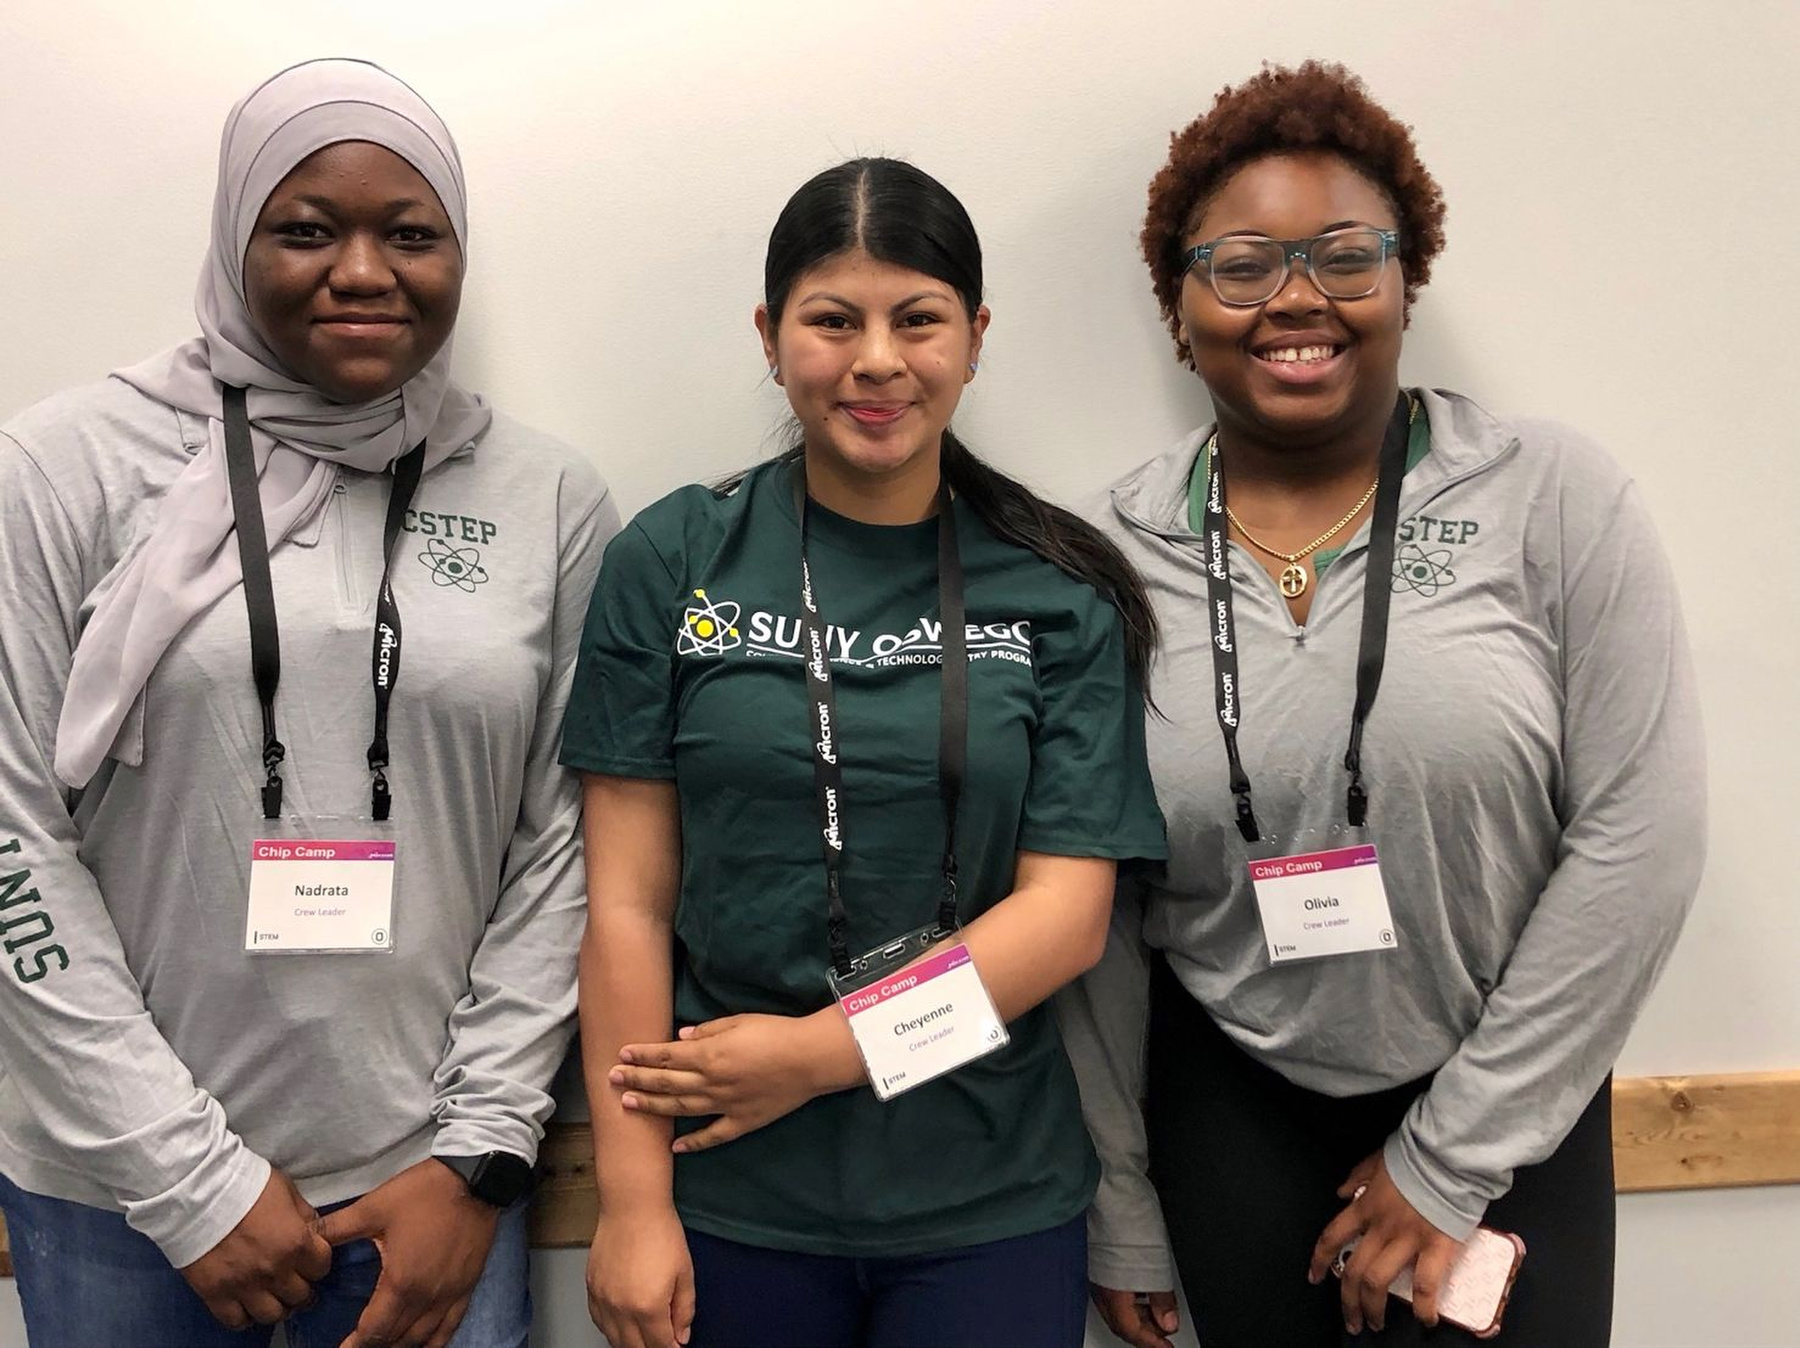 Three SUNY Oswego CSTEP (Collegiate Science and Technology Entry Program) students were among those helping with a recent Micron-sponsored Chip Camp in July, hosted at Onondaga Community College (OCC) for more than 100 students from Onondaga and Oswego counties. Shown from left are Nadrata Abdul-Salam, Cheyenne Sinchico and Olivia Odigie.